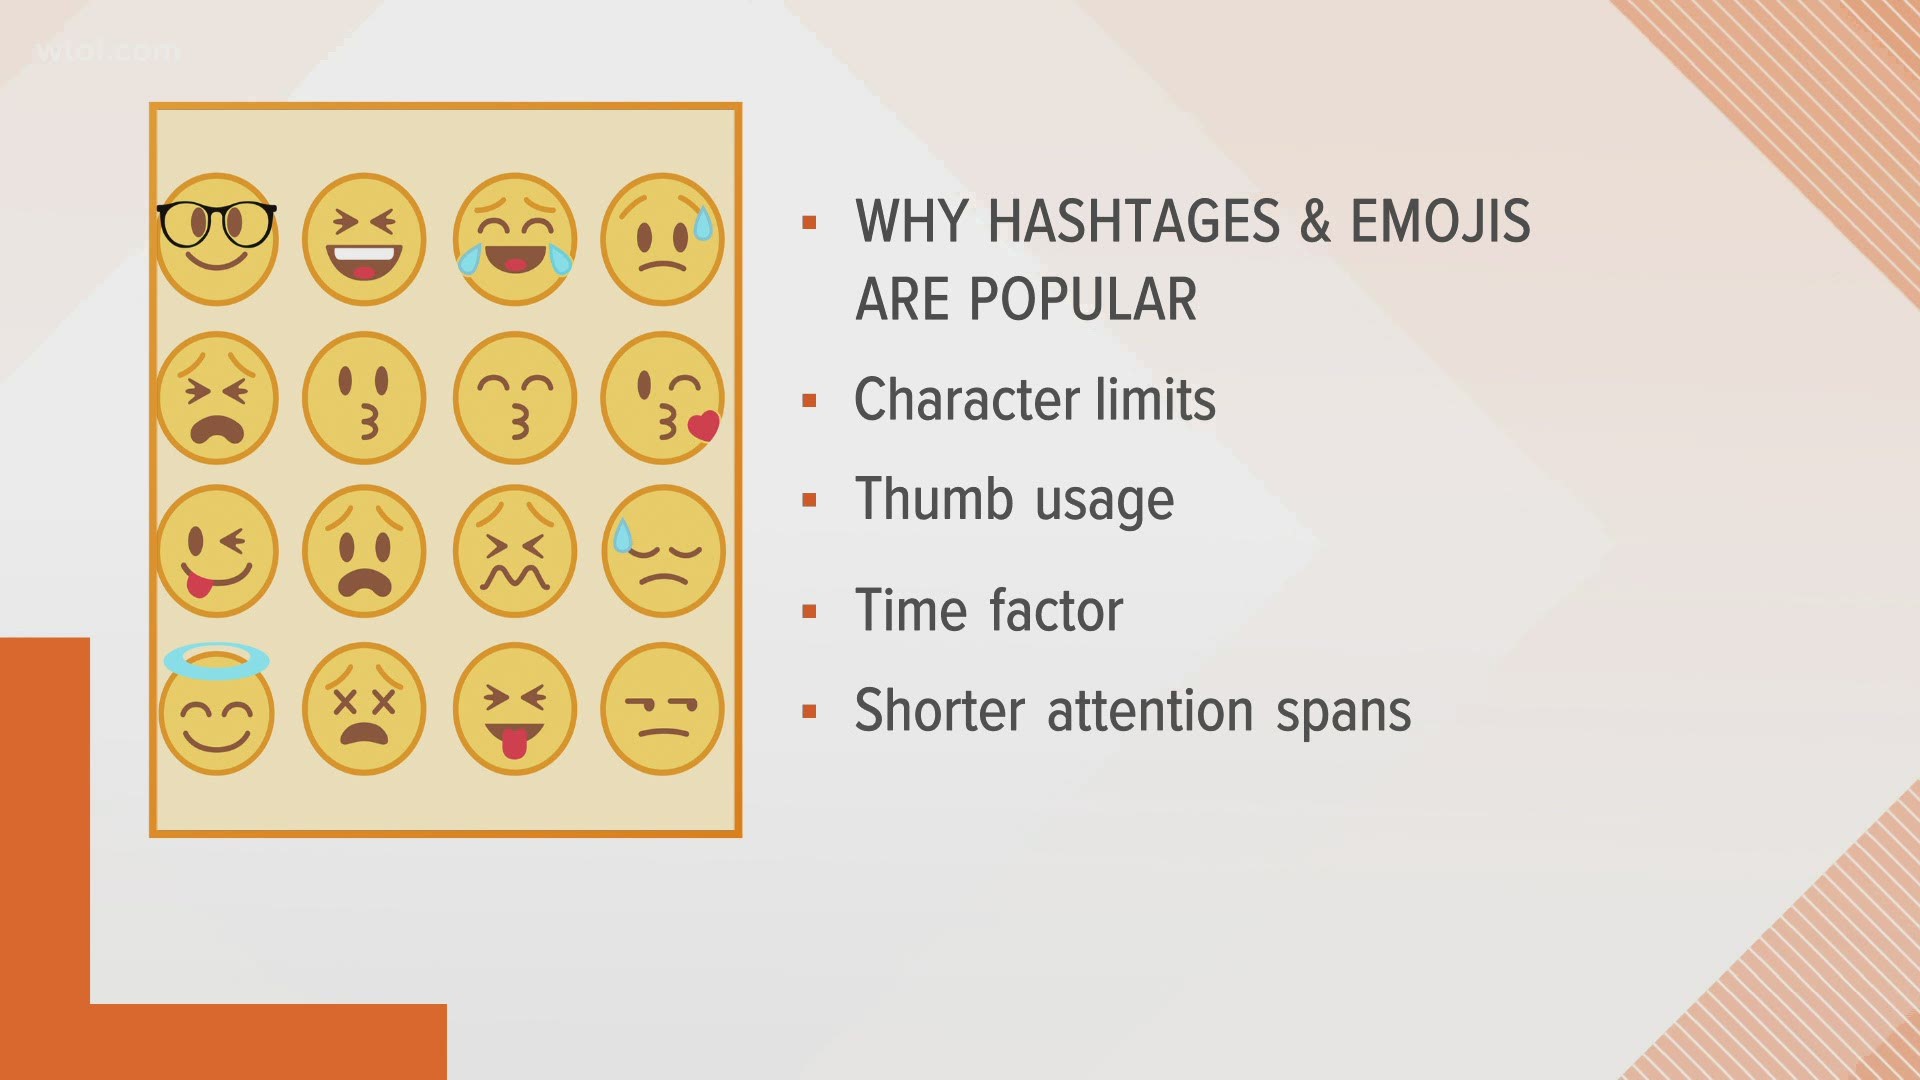 Have you ever wondered where hashtags and emojis came from? Here's a little history of being brief.